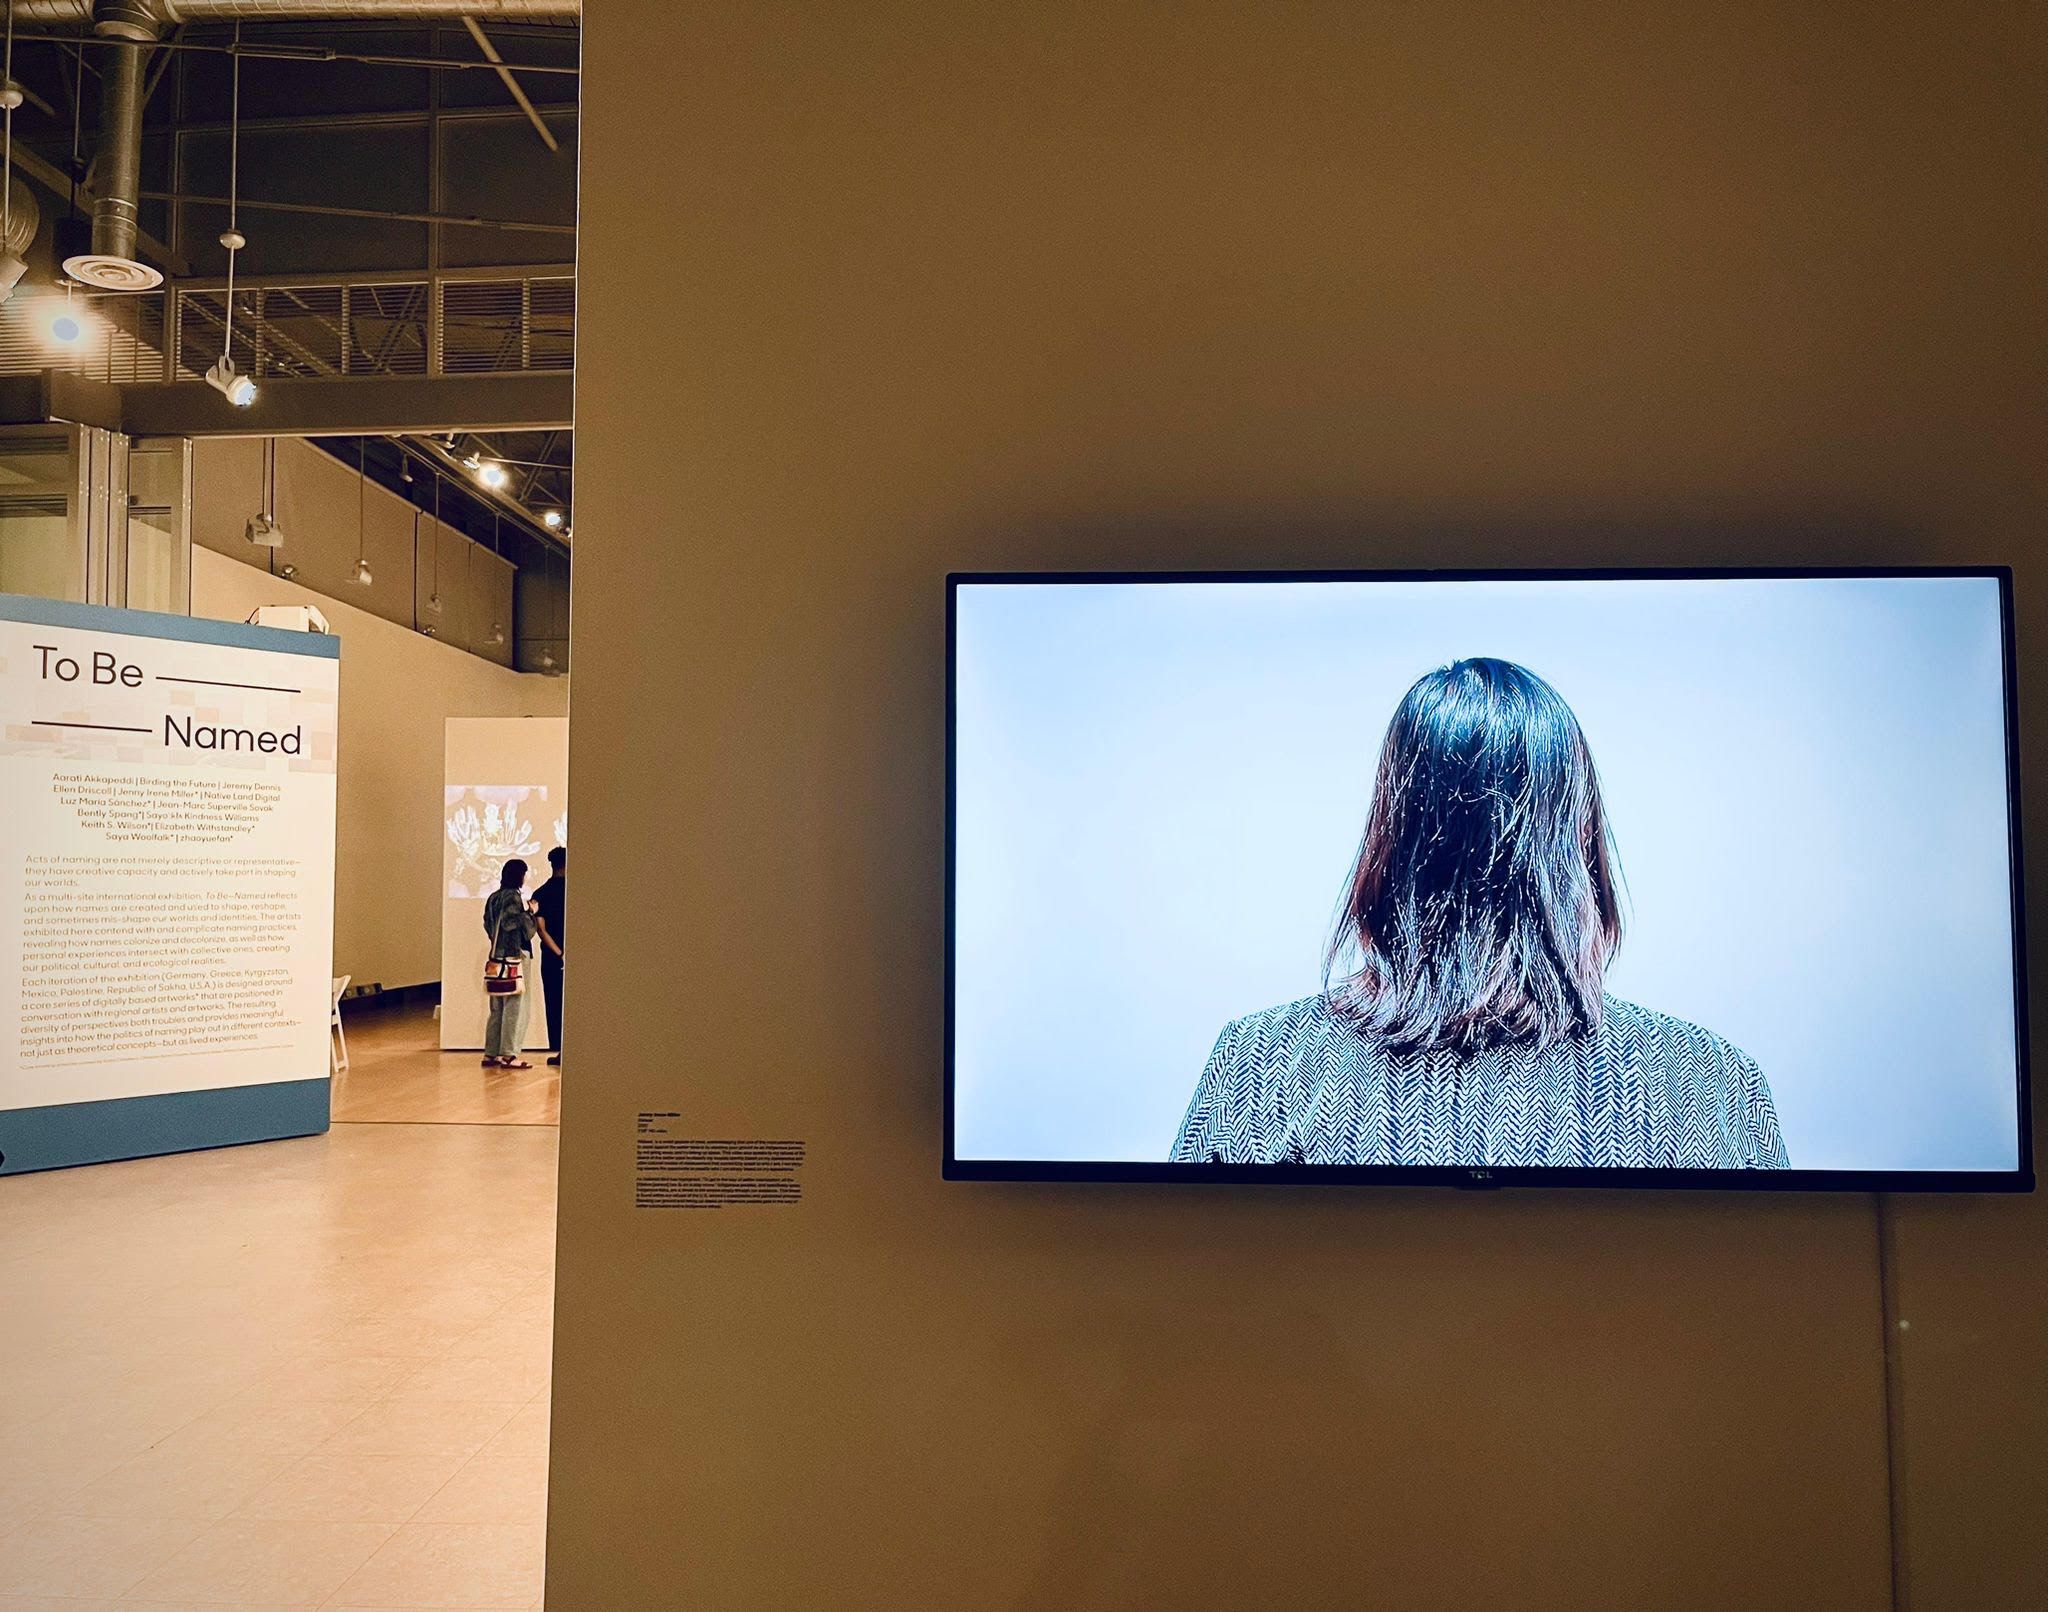 A video screen shows the back of a person's head.